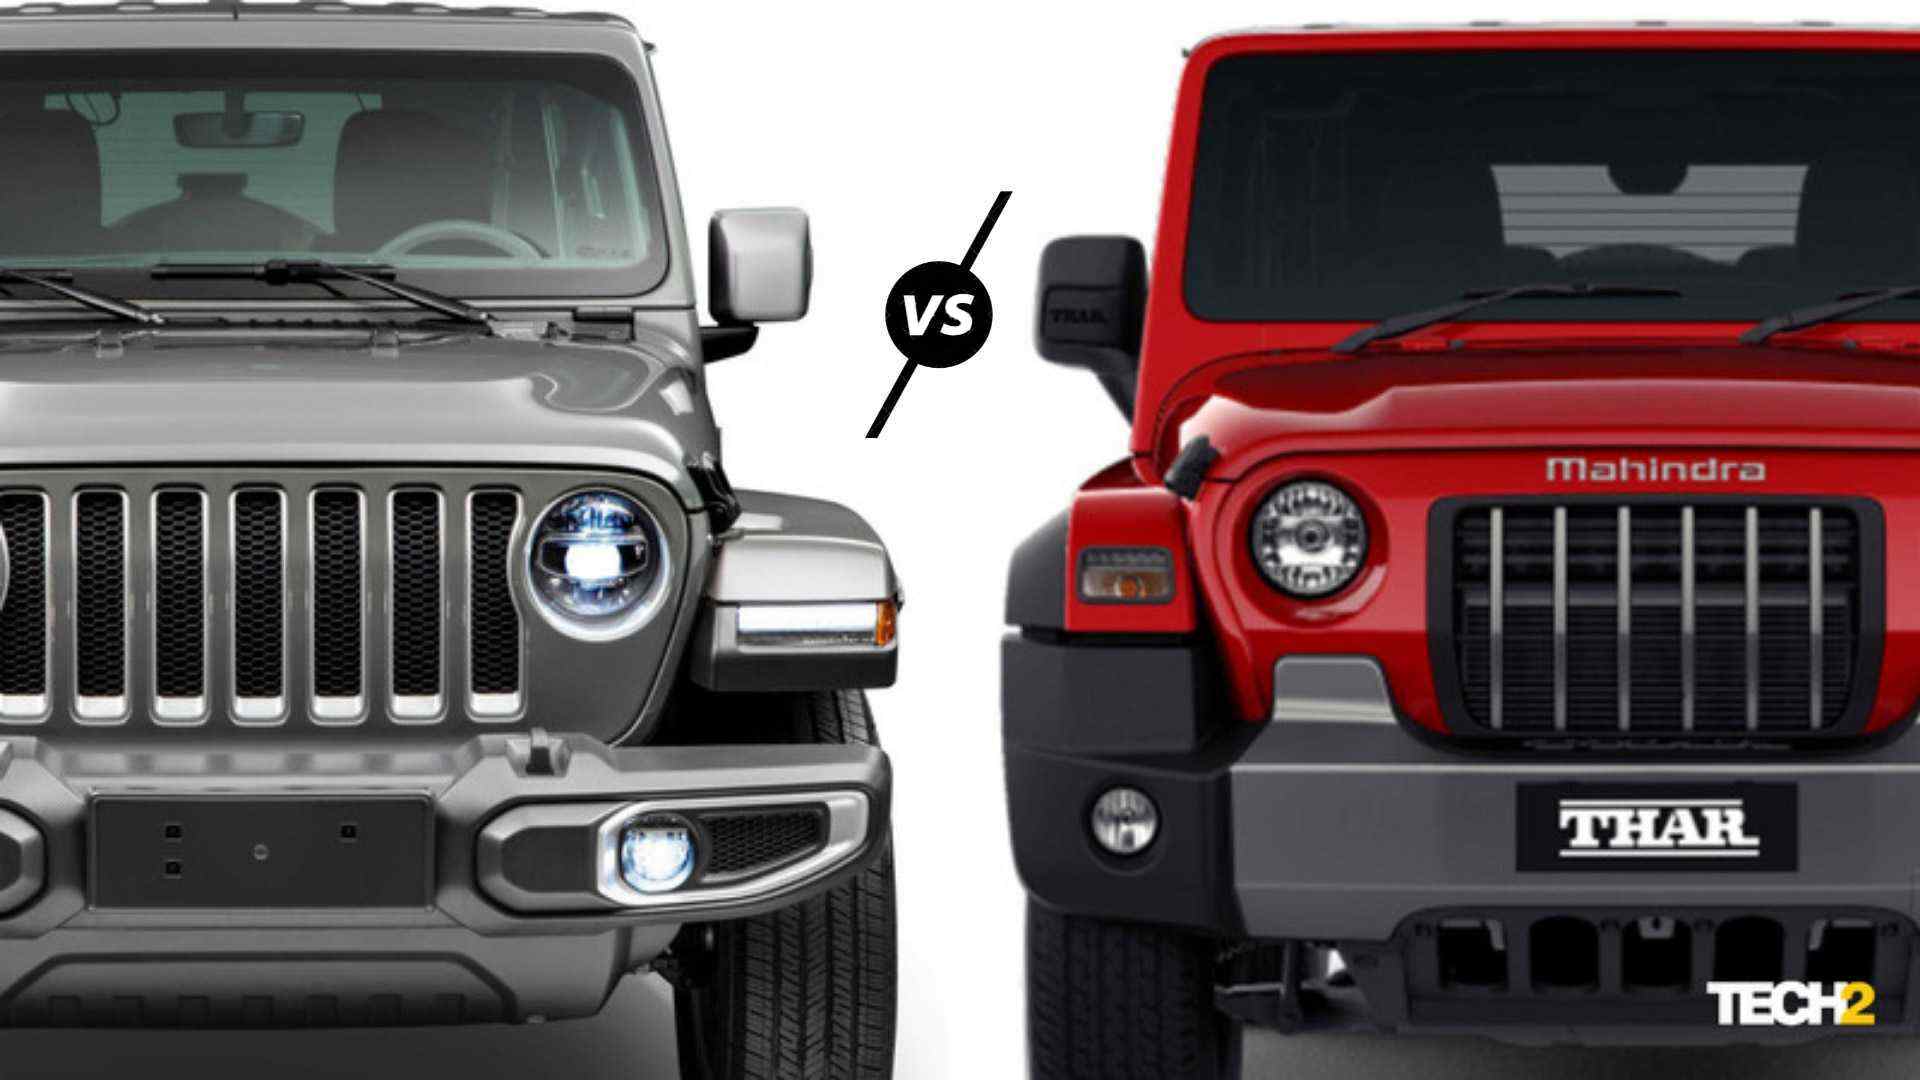 There's no denying the visual link between the second-gen Mahindra Thar and the current Jeep Wrangler. Image: Tech2/Amaan Ahmed